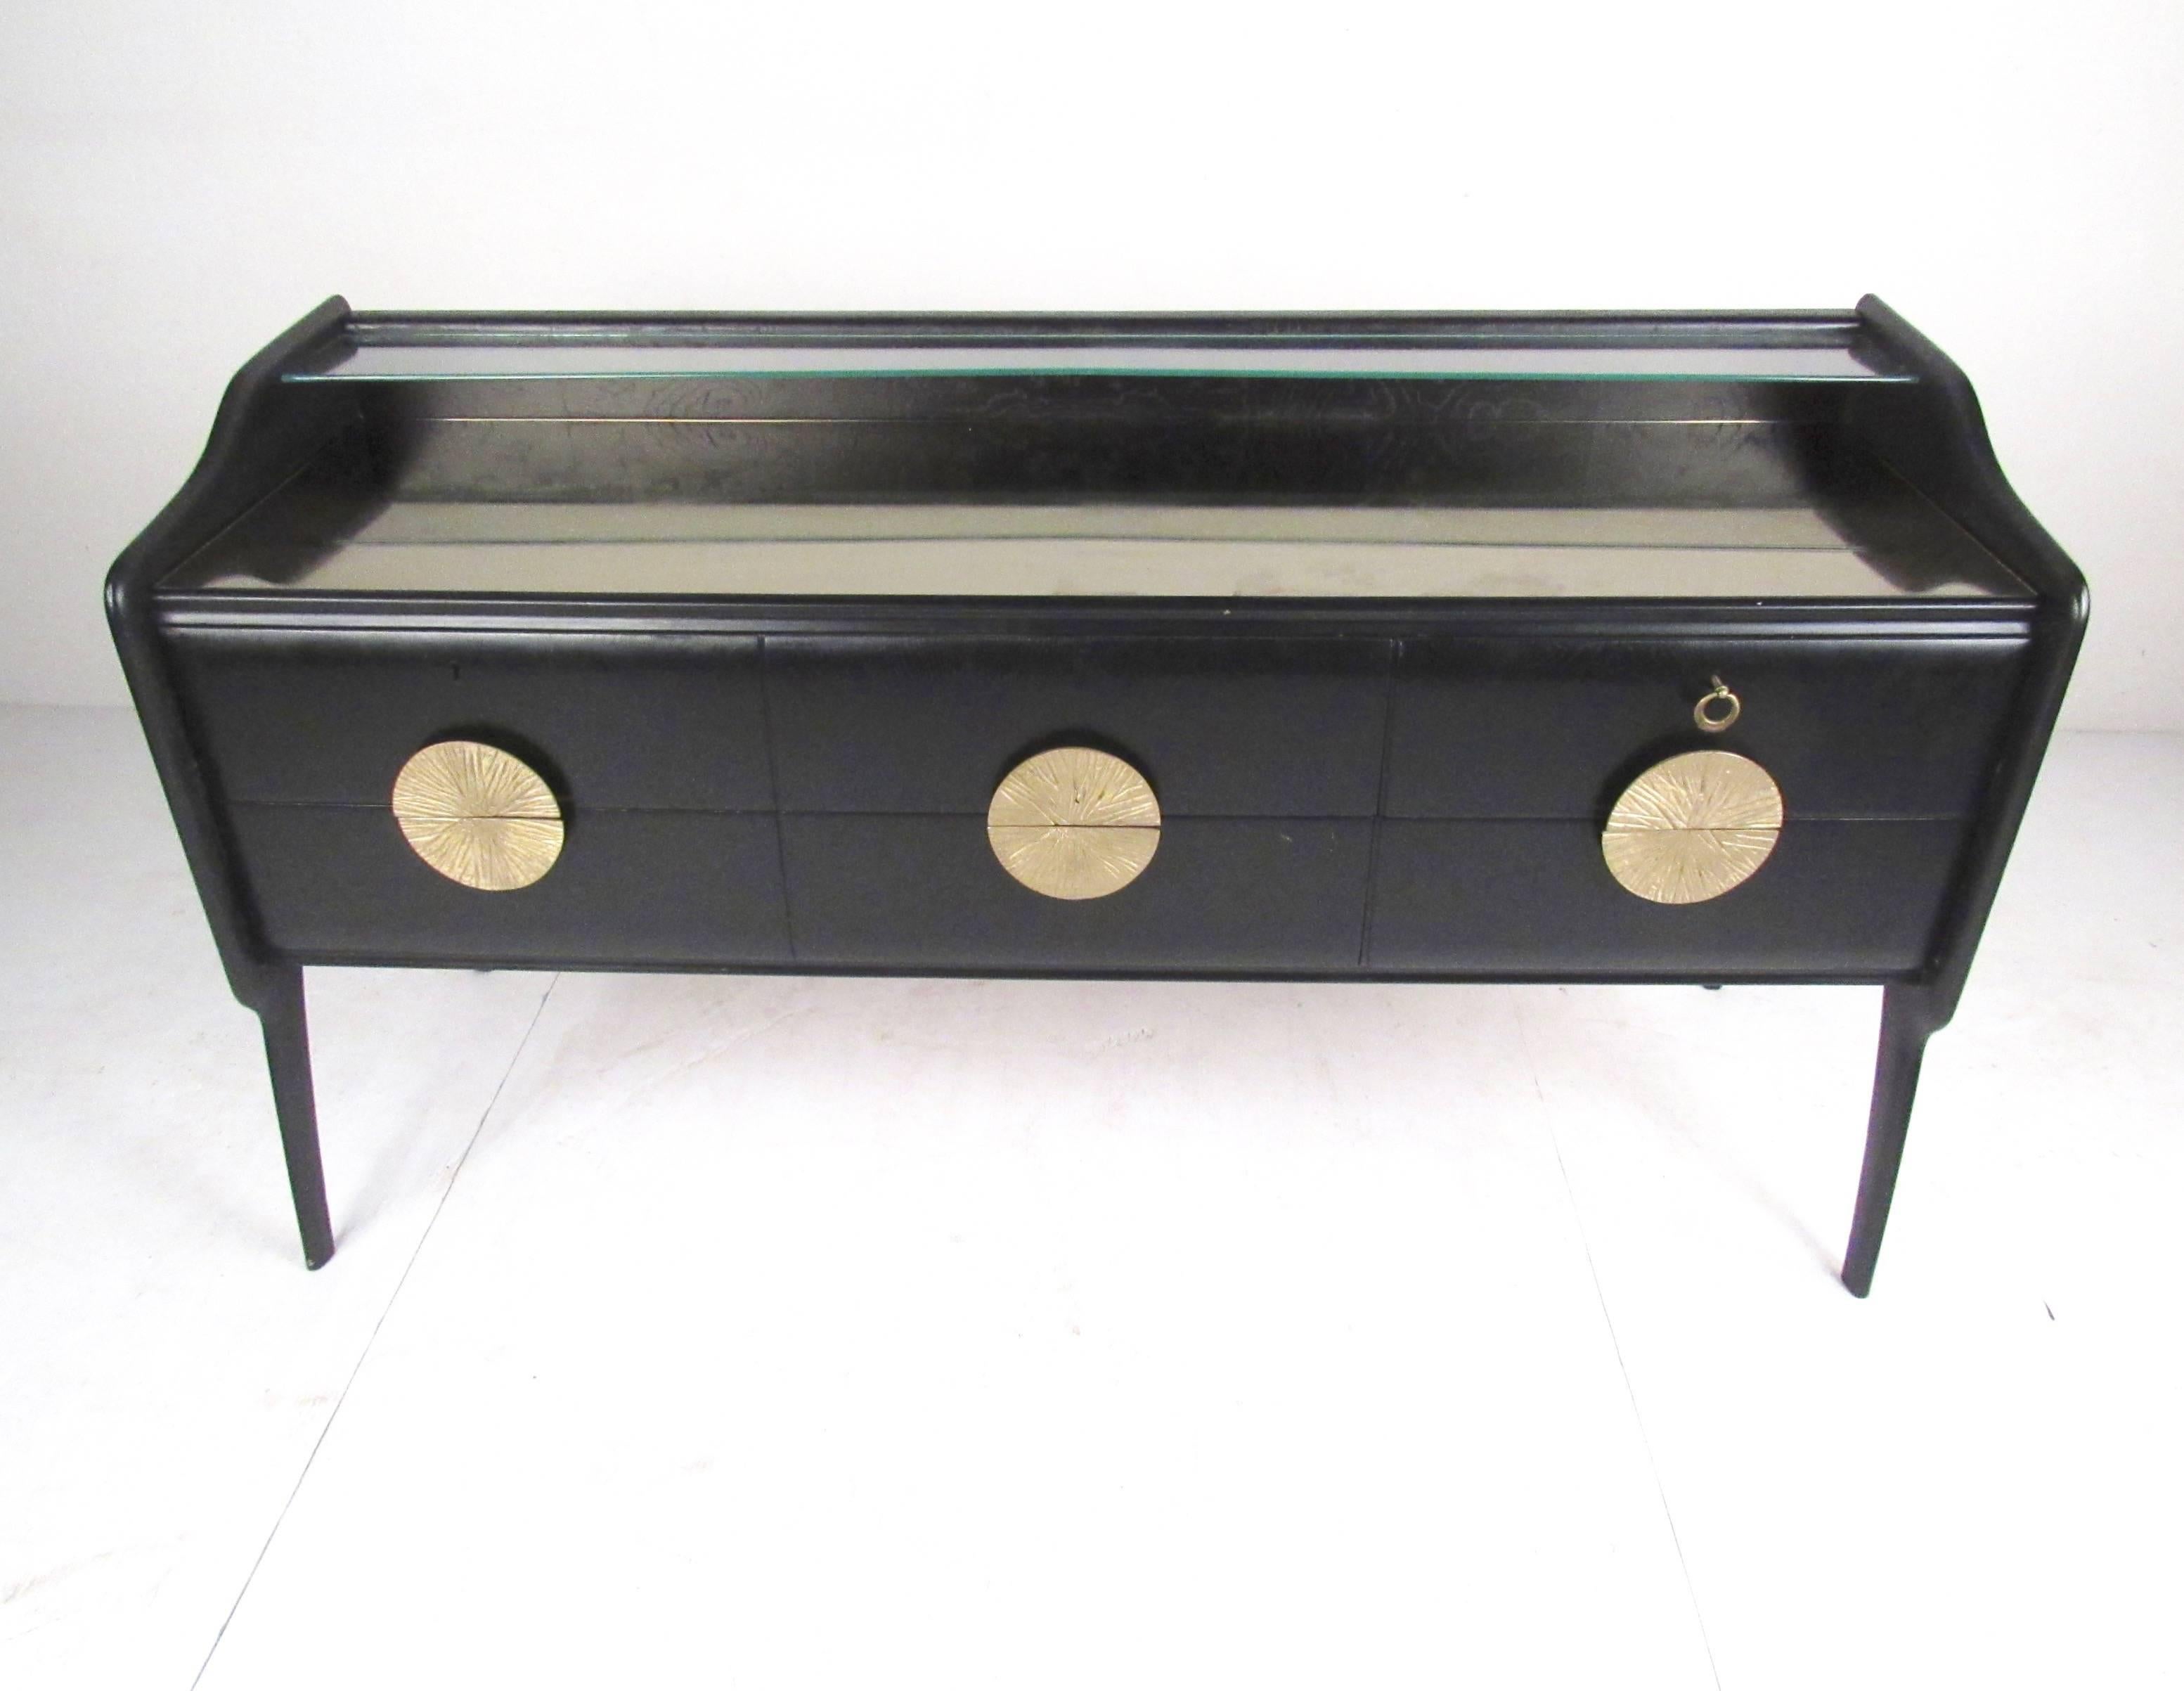 This unique vintage sideboard features two-tier glass top with small storage shelf built into the Italian modern design. Decorative brass finish pulls contrast wonderfully with the black finish. Six storage drawers with two locking make this an